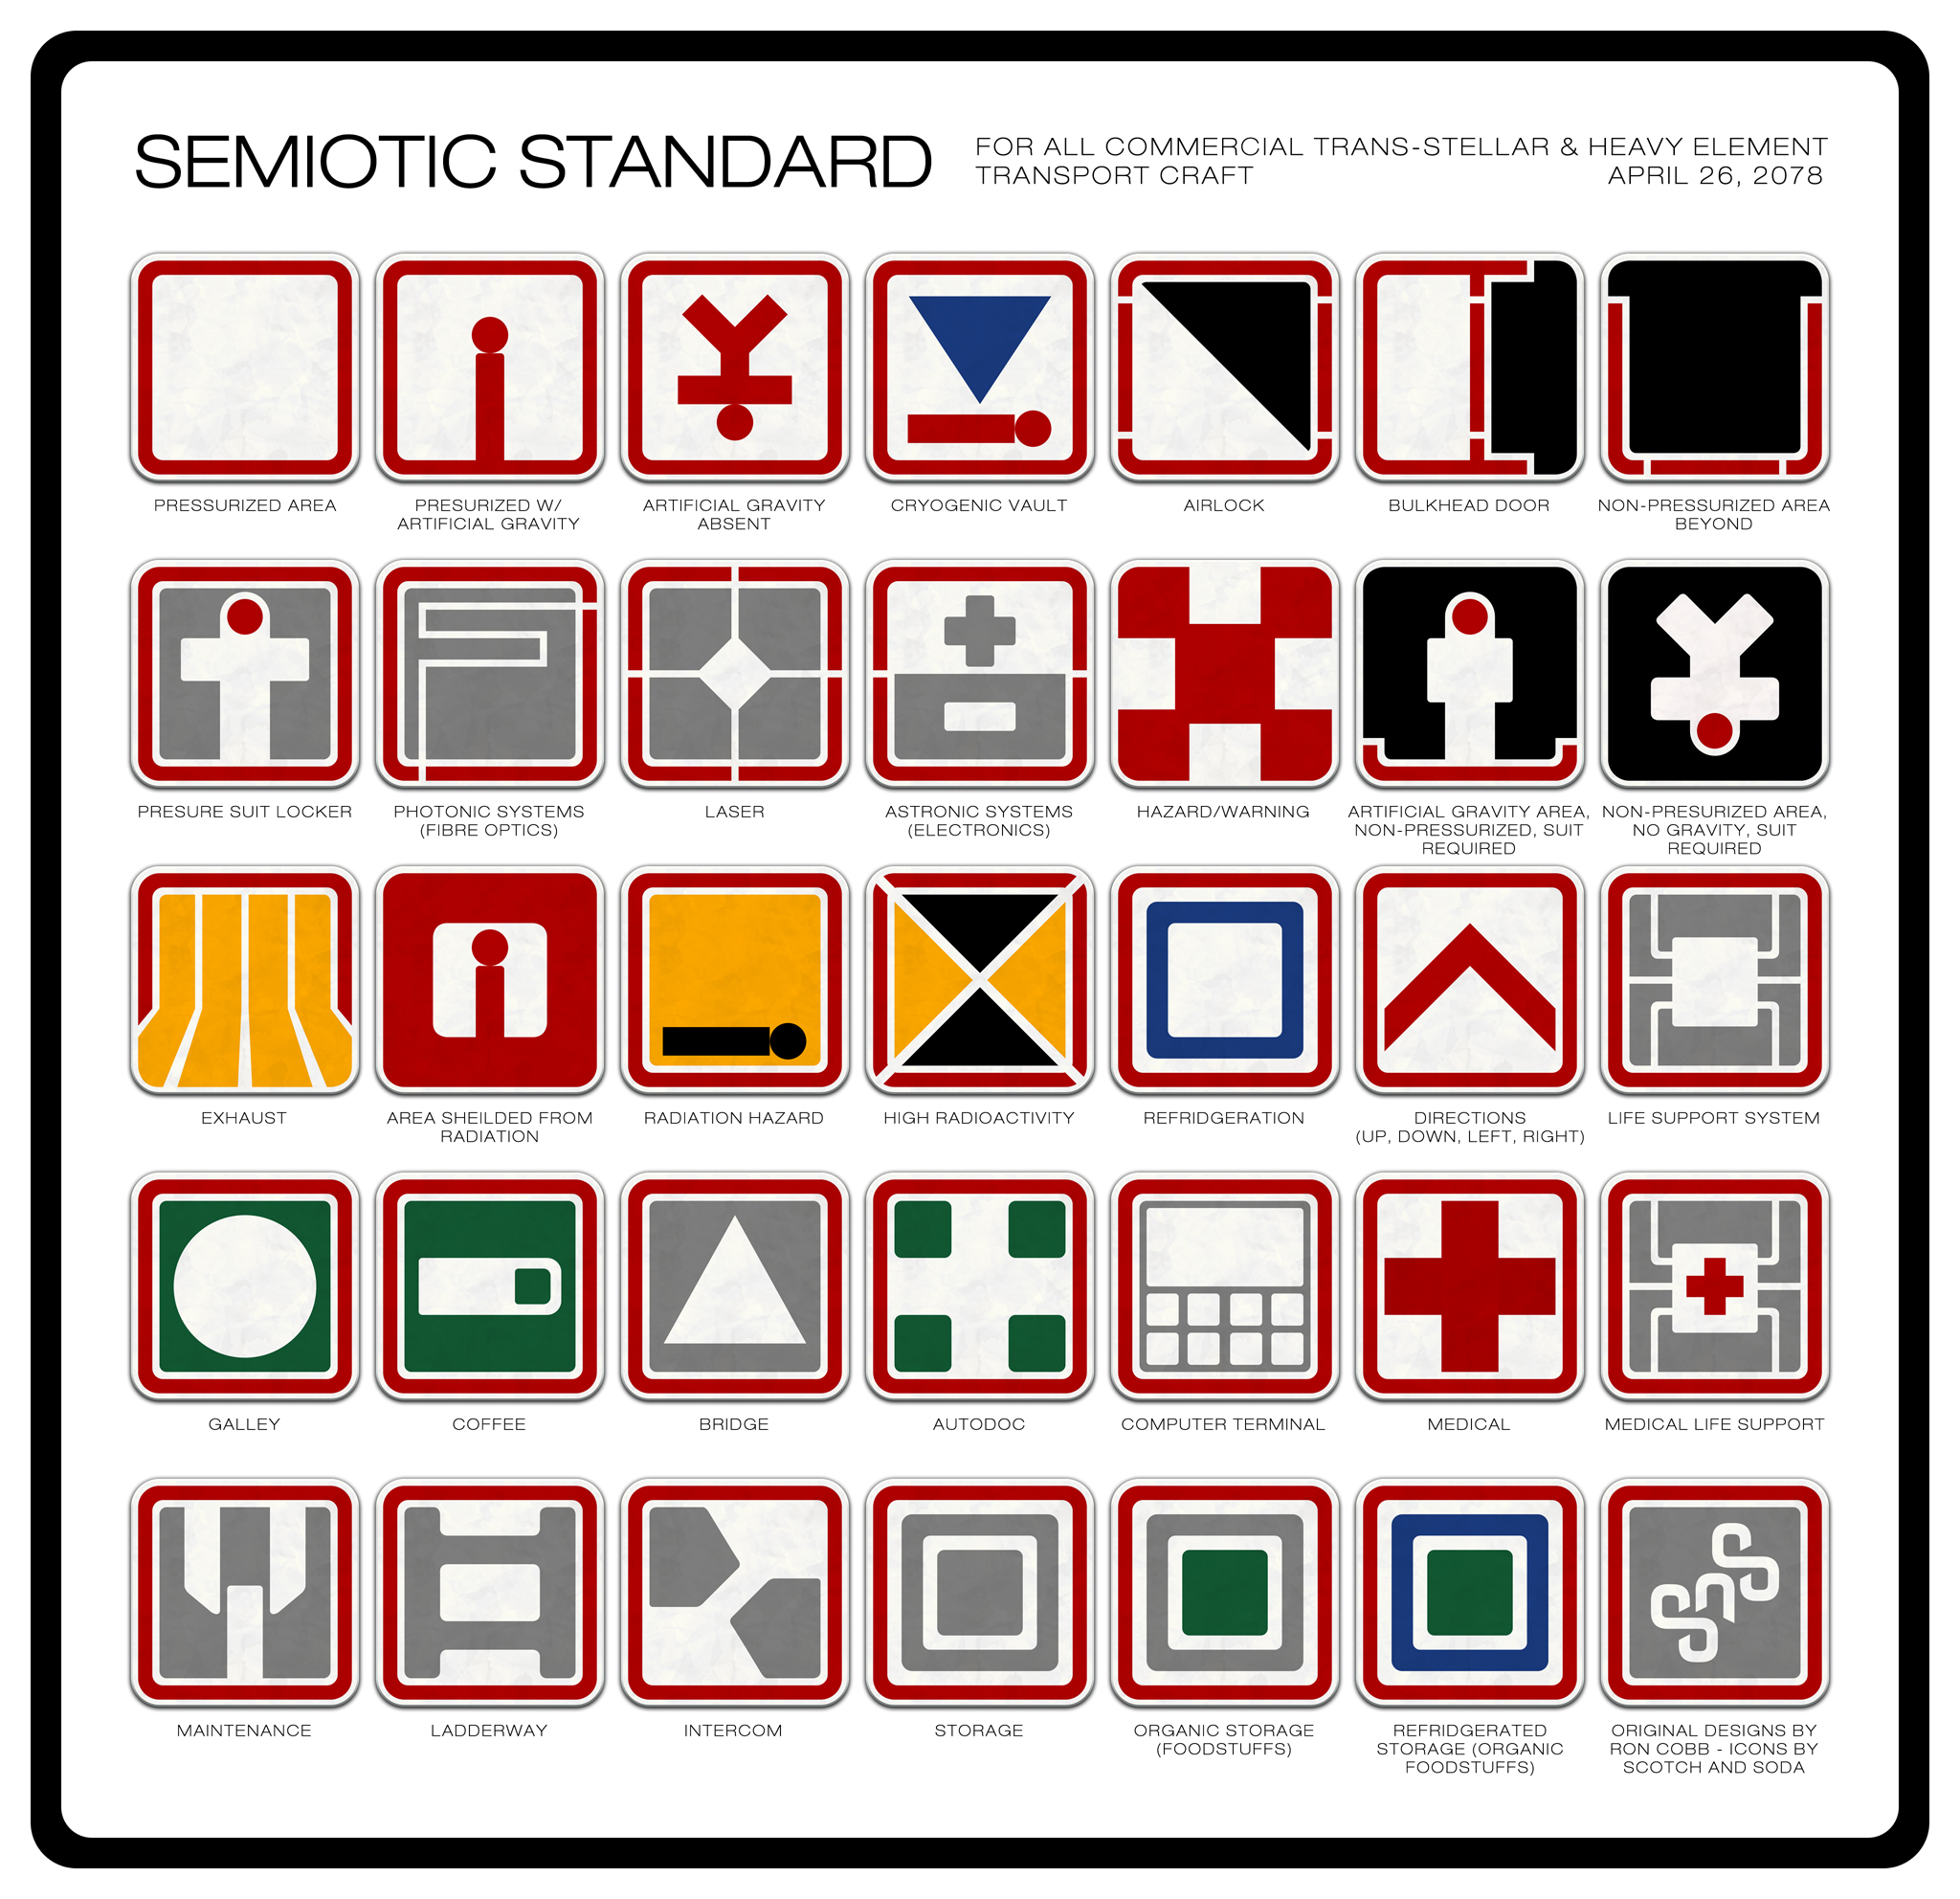 alien_semiotic_standard_icons_by_scotch_and_soda-d351v1c.jpg